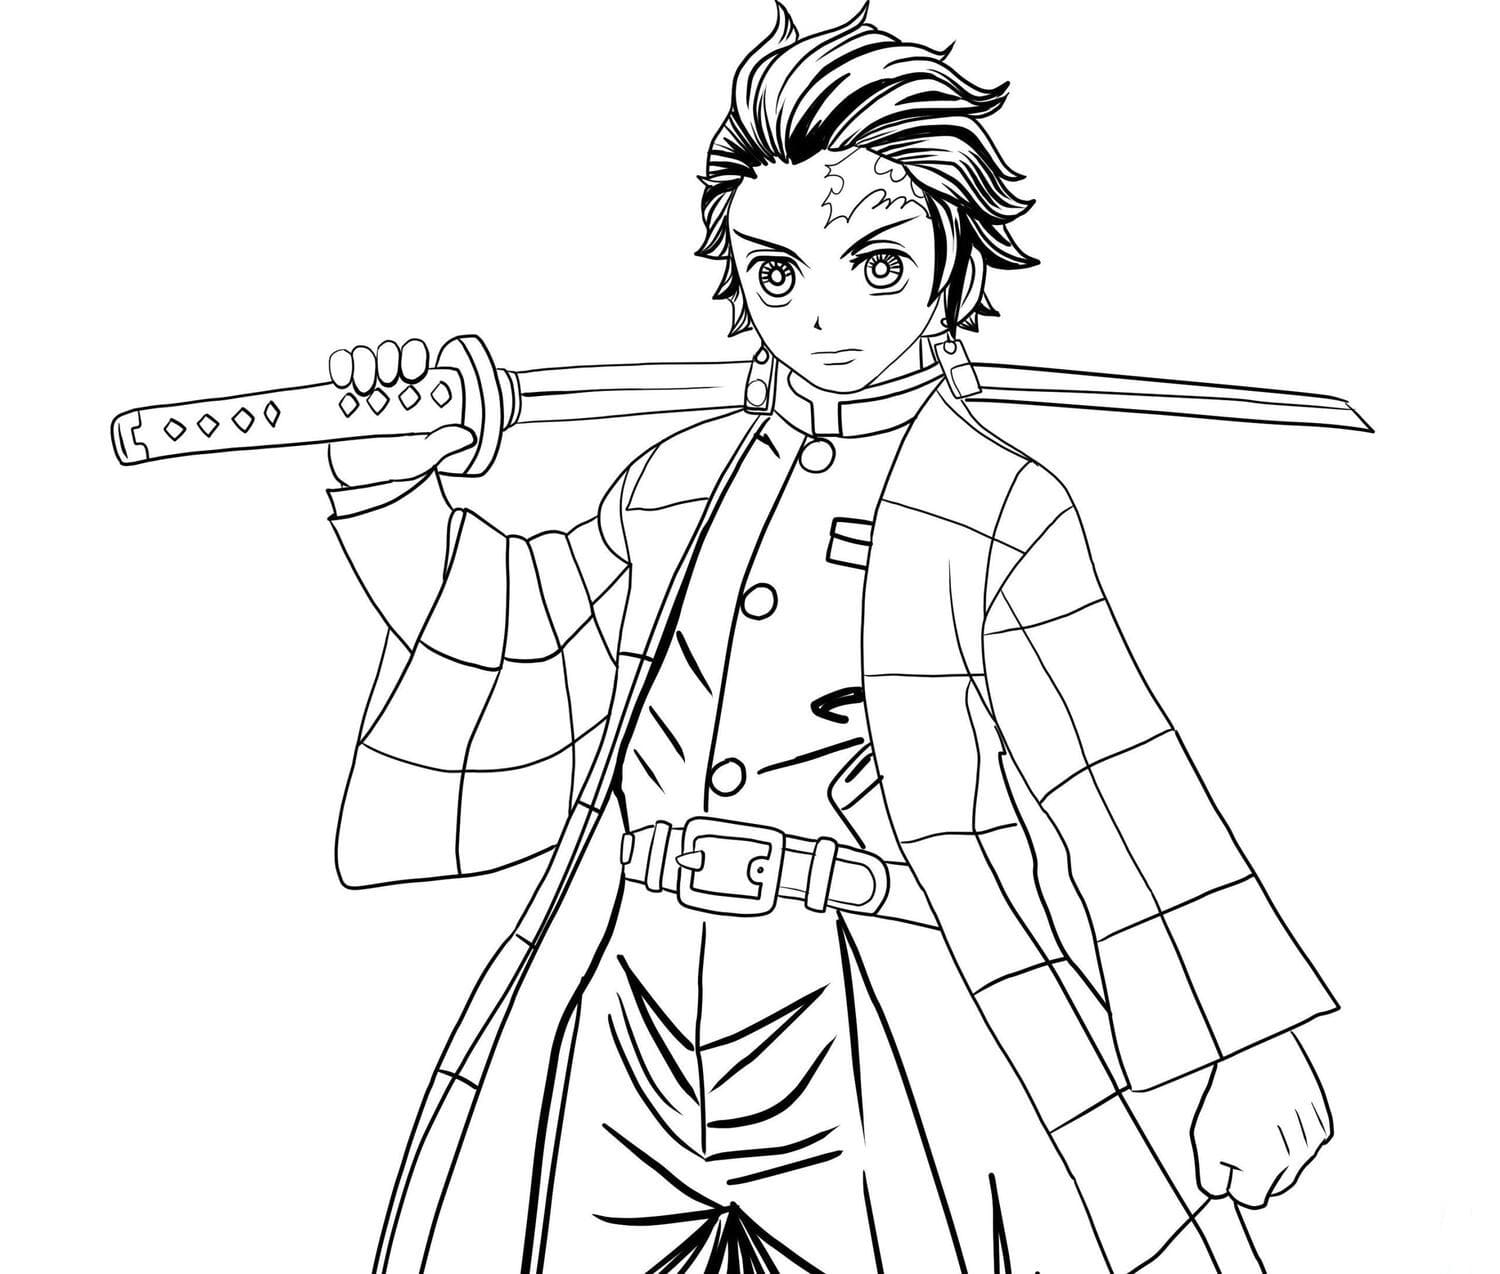 Tanjiro is Holding Katana coloring page - Download, Print or Color ...